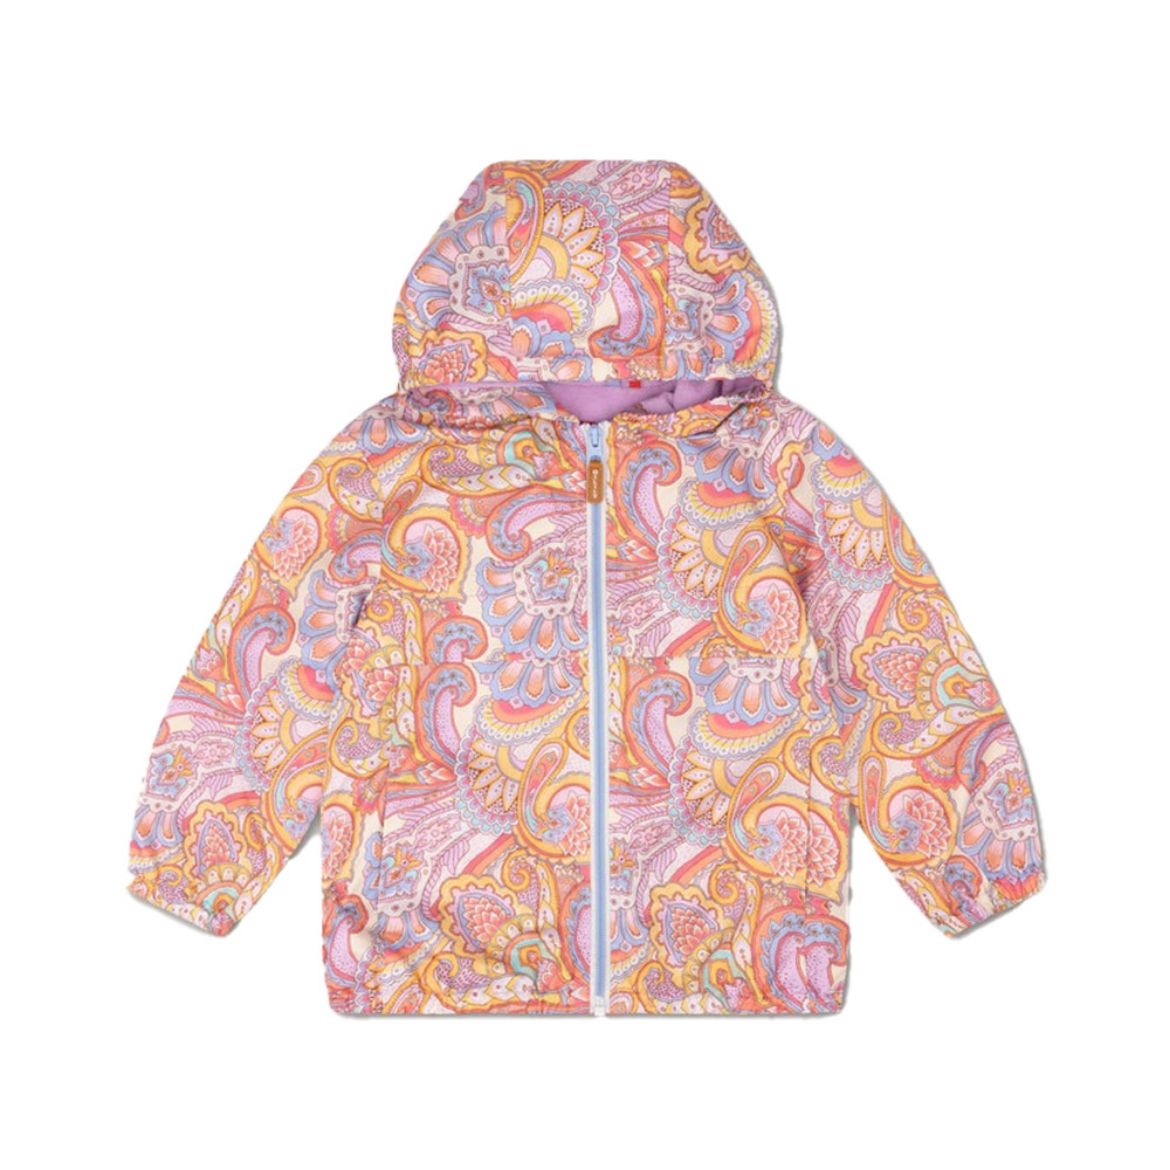 Picture of Oilily Girls Cooky Paisley Print Jacket